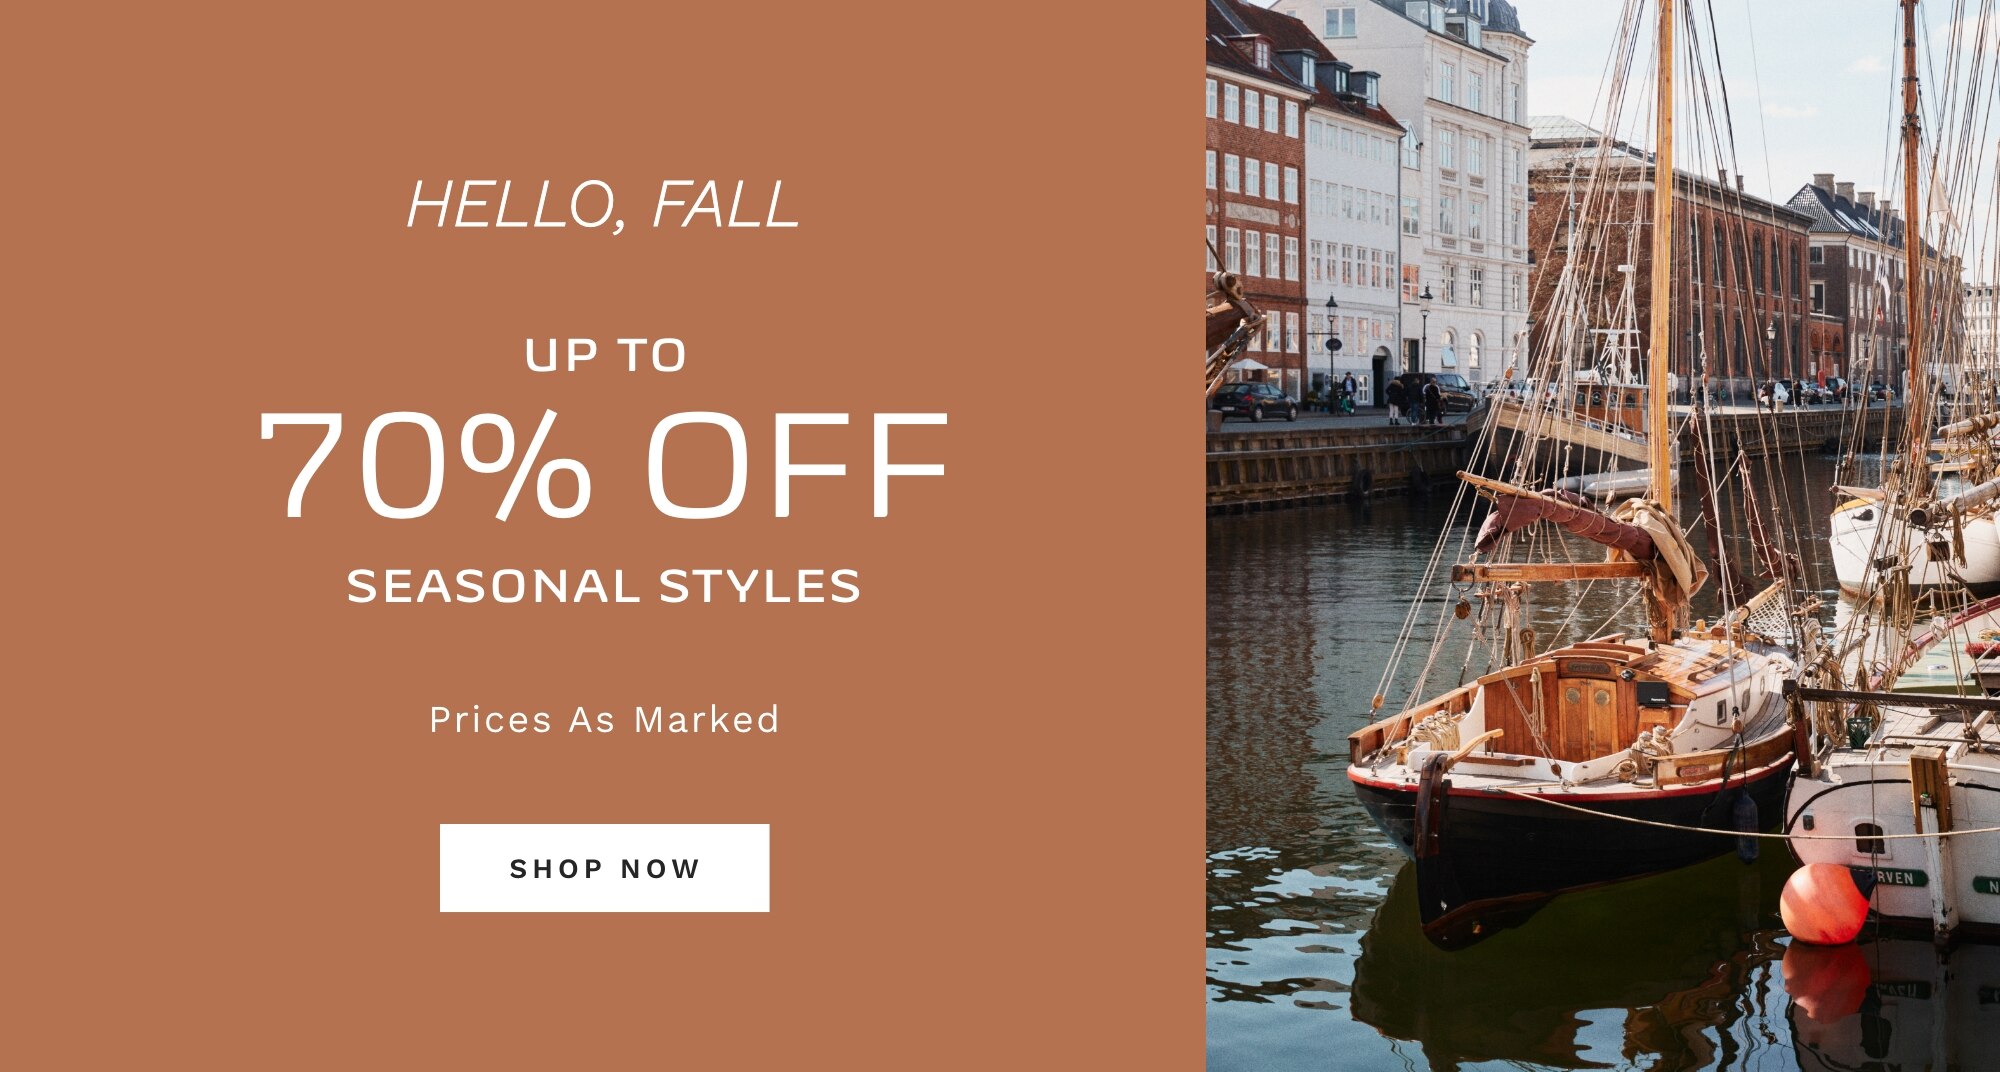 HELLO, FALL UP TO 70% OFF SEASONAL STYLES SHOP NOW Prices as Marked